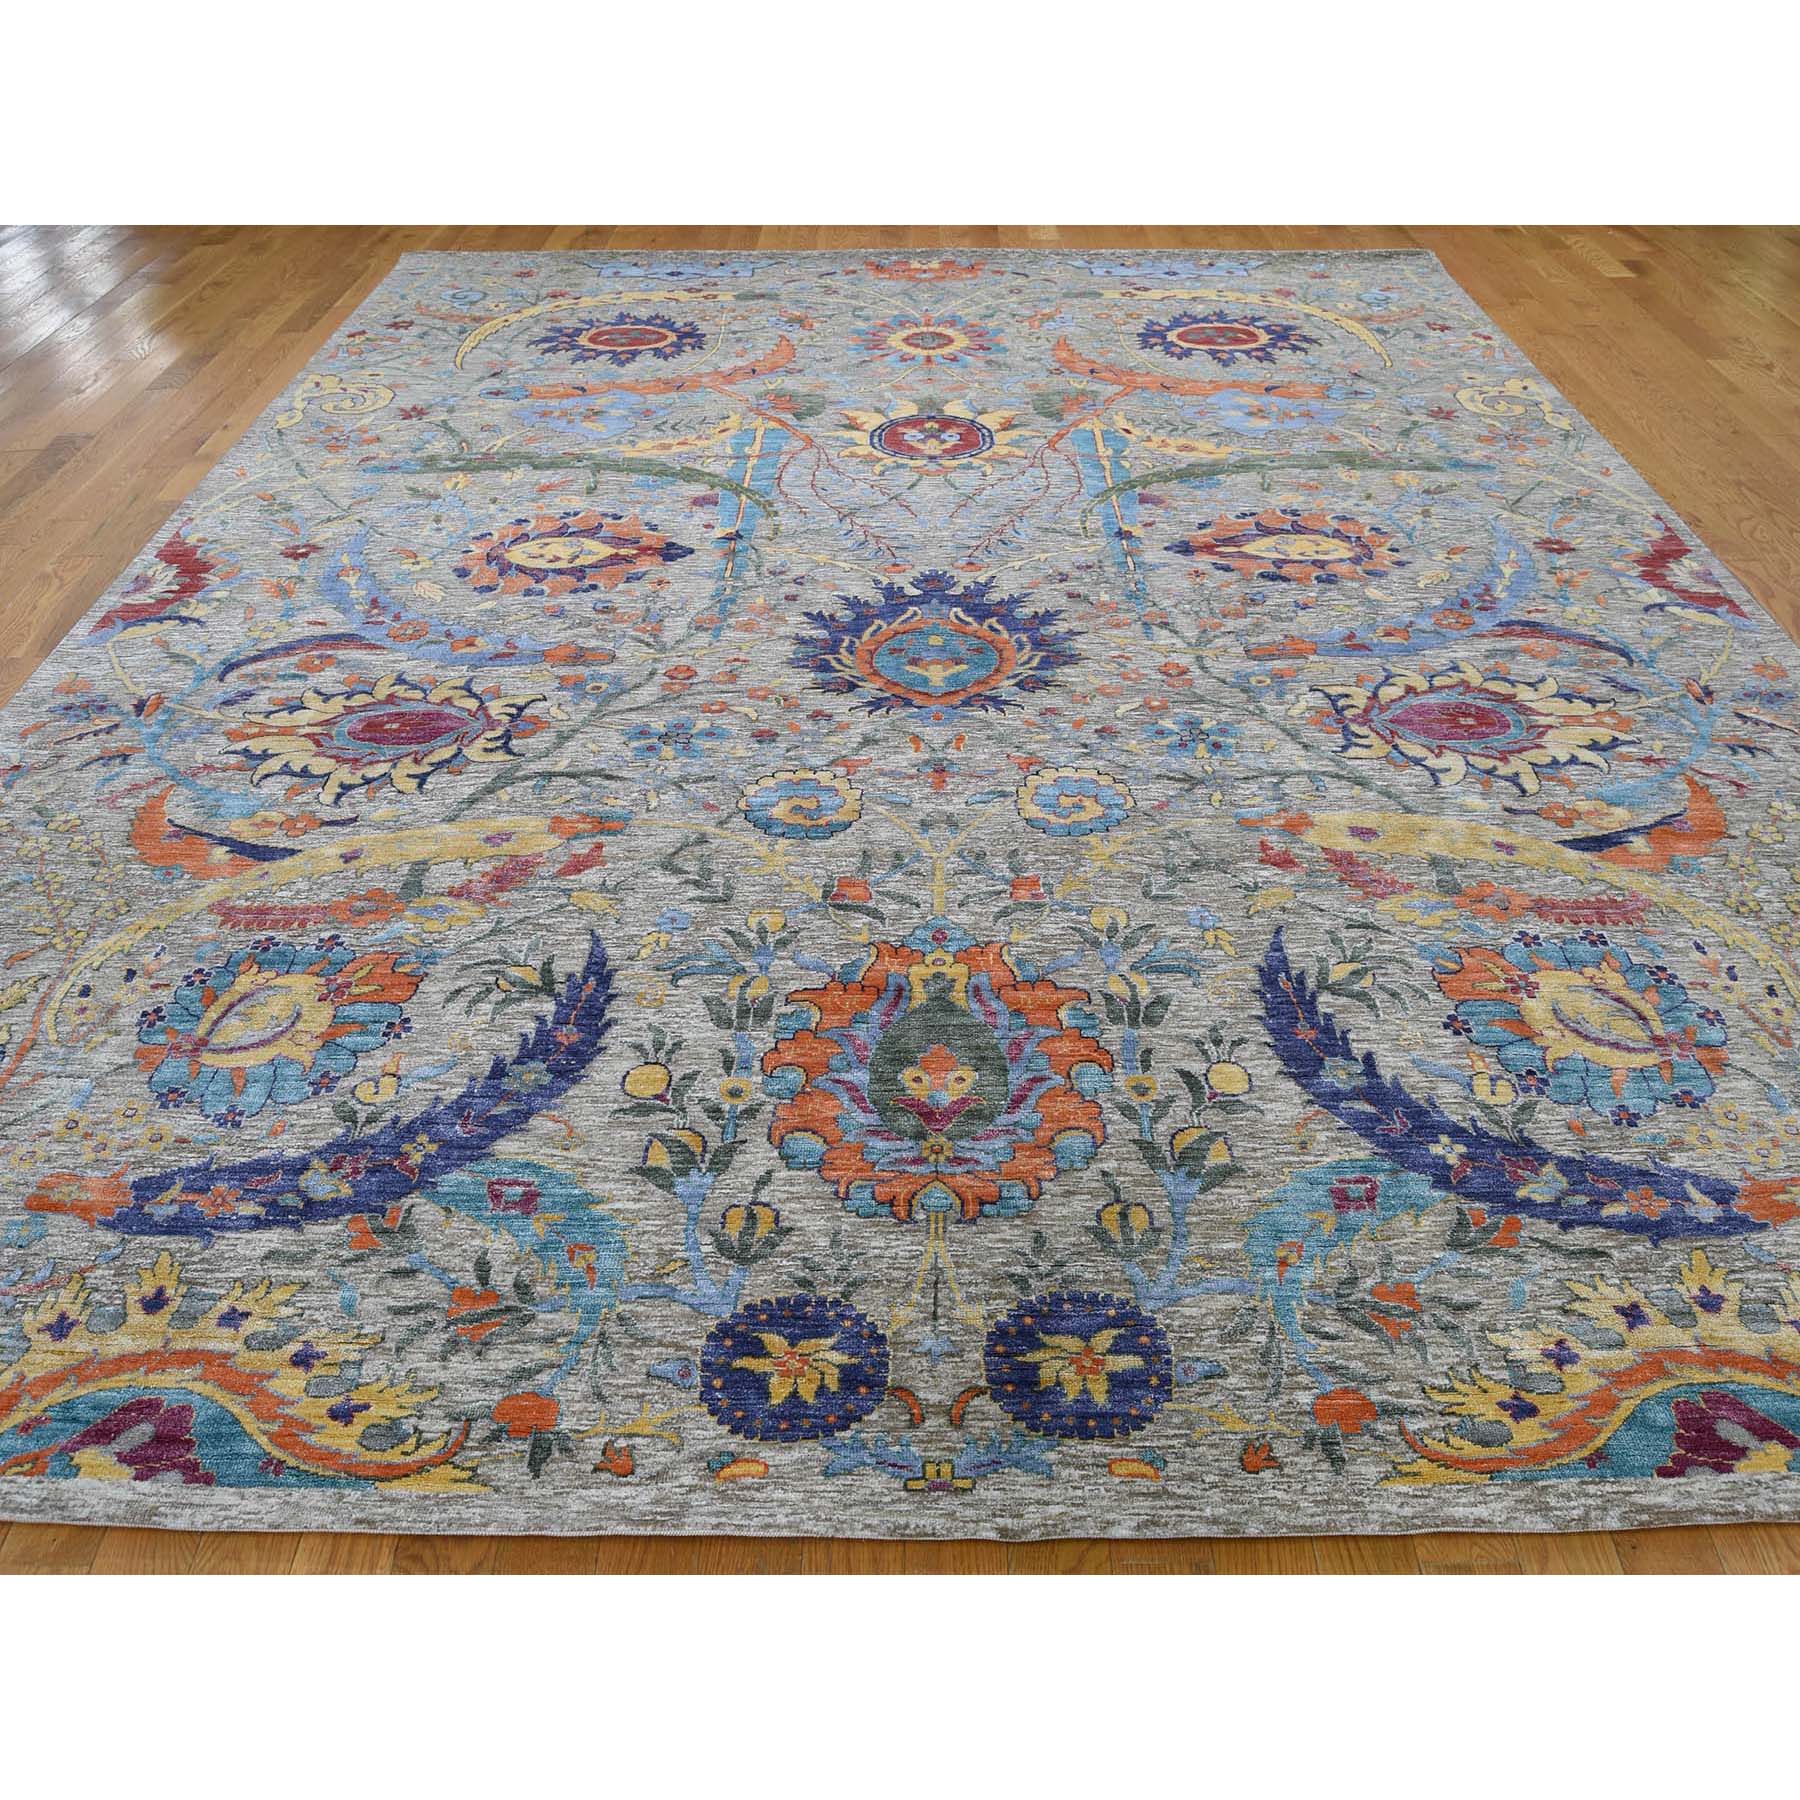 10-x14-2  Sickle Leaf Design Silk With Textured Wool Hand-Knotted Oriental Rug 